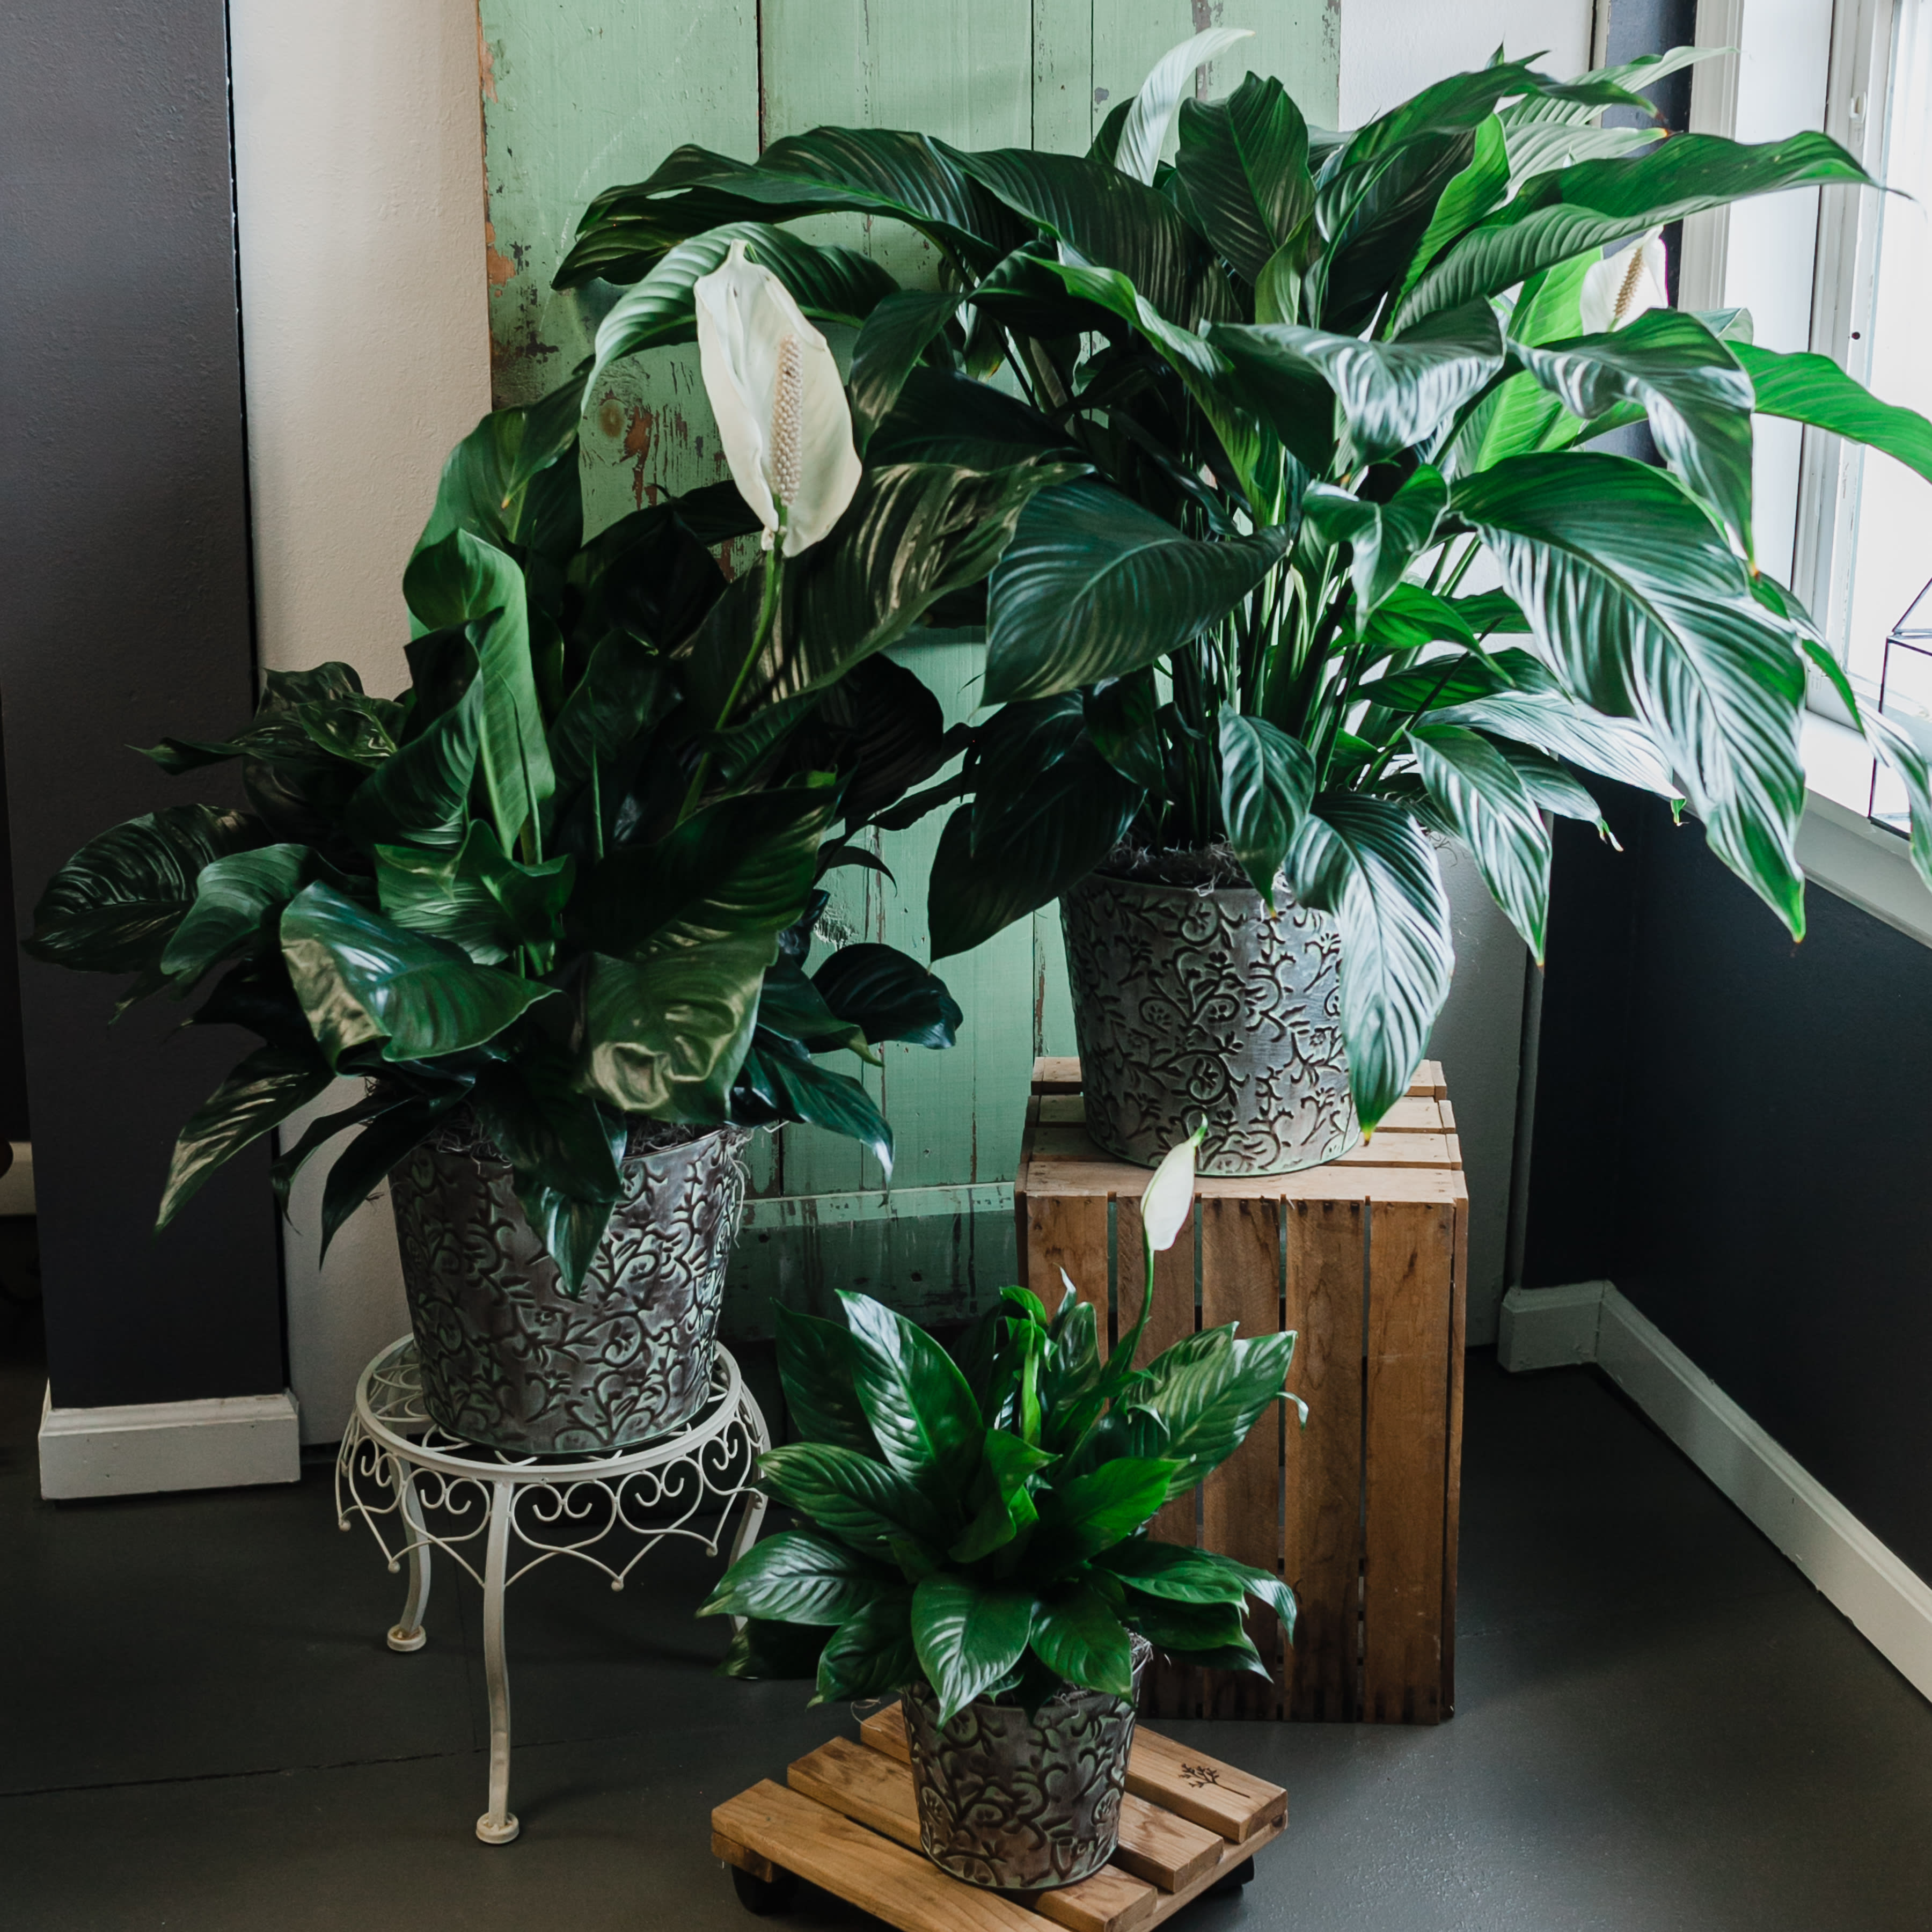 Peace Lily - Spathiphyllum - 3 different sizes and prices - Known for its indoor beauty and ability to clear the air of contaminants, this low maintenance plant makes a perfect gift for almost any occasion. We offer 3 sizes, see descriptions below. The plant will come in a metal decorative pot with a bow.  6&quot; Peace Lily (6&quot; is the diameter of the pot) - Approximately 2.8 feet tall by 14 inches wide 8&quot; Peace Lily (8&quot; is the diameter of the pot) - Approximately 3.5 feet tall by 23 inches wide 10&quot; Peace Lily (10&quot; is the diameter of the pot) - Approximately 4 feet tall by 28 inches wide      